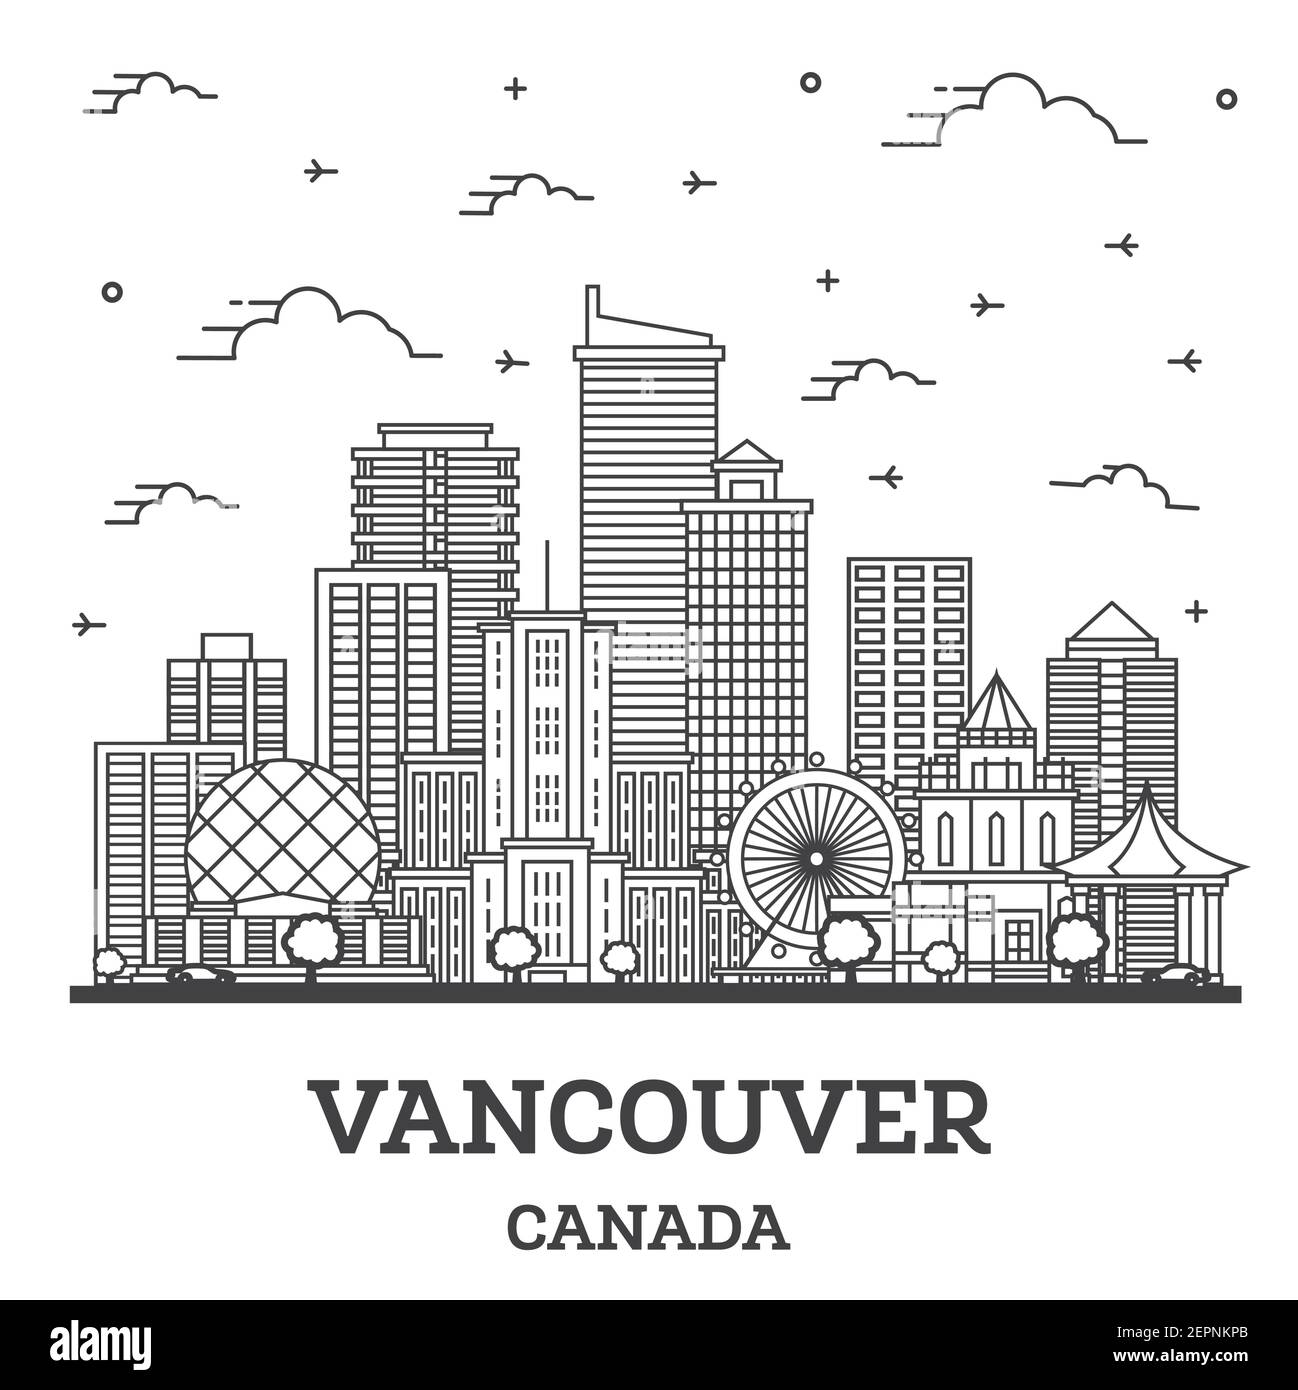 Outline Vancouver Canada City Skyline with Modern Buildings Isolated on White. Vector Illustration. Vancouver Cityscape with Landmarks. Stock Vector